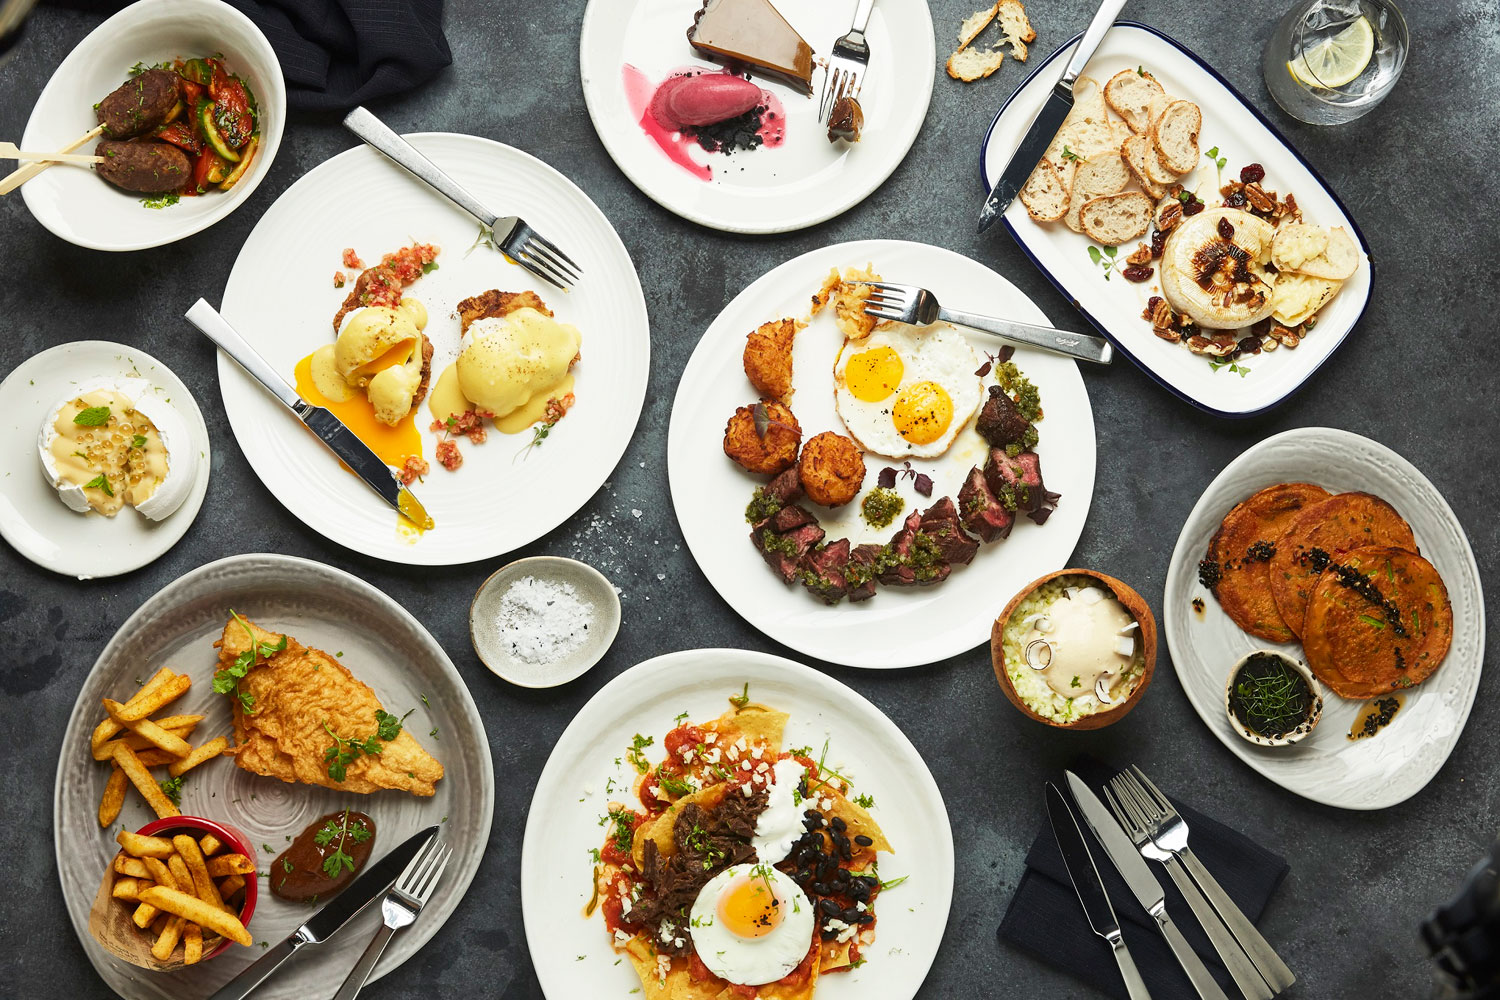 Get brunch and a night’s stay for just Dhs799 for two | Time Out Dubai